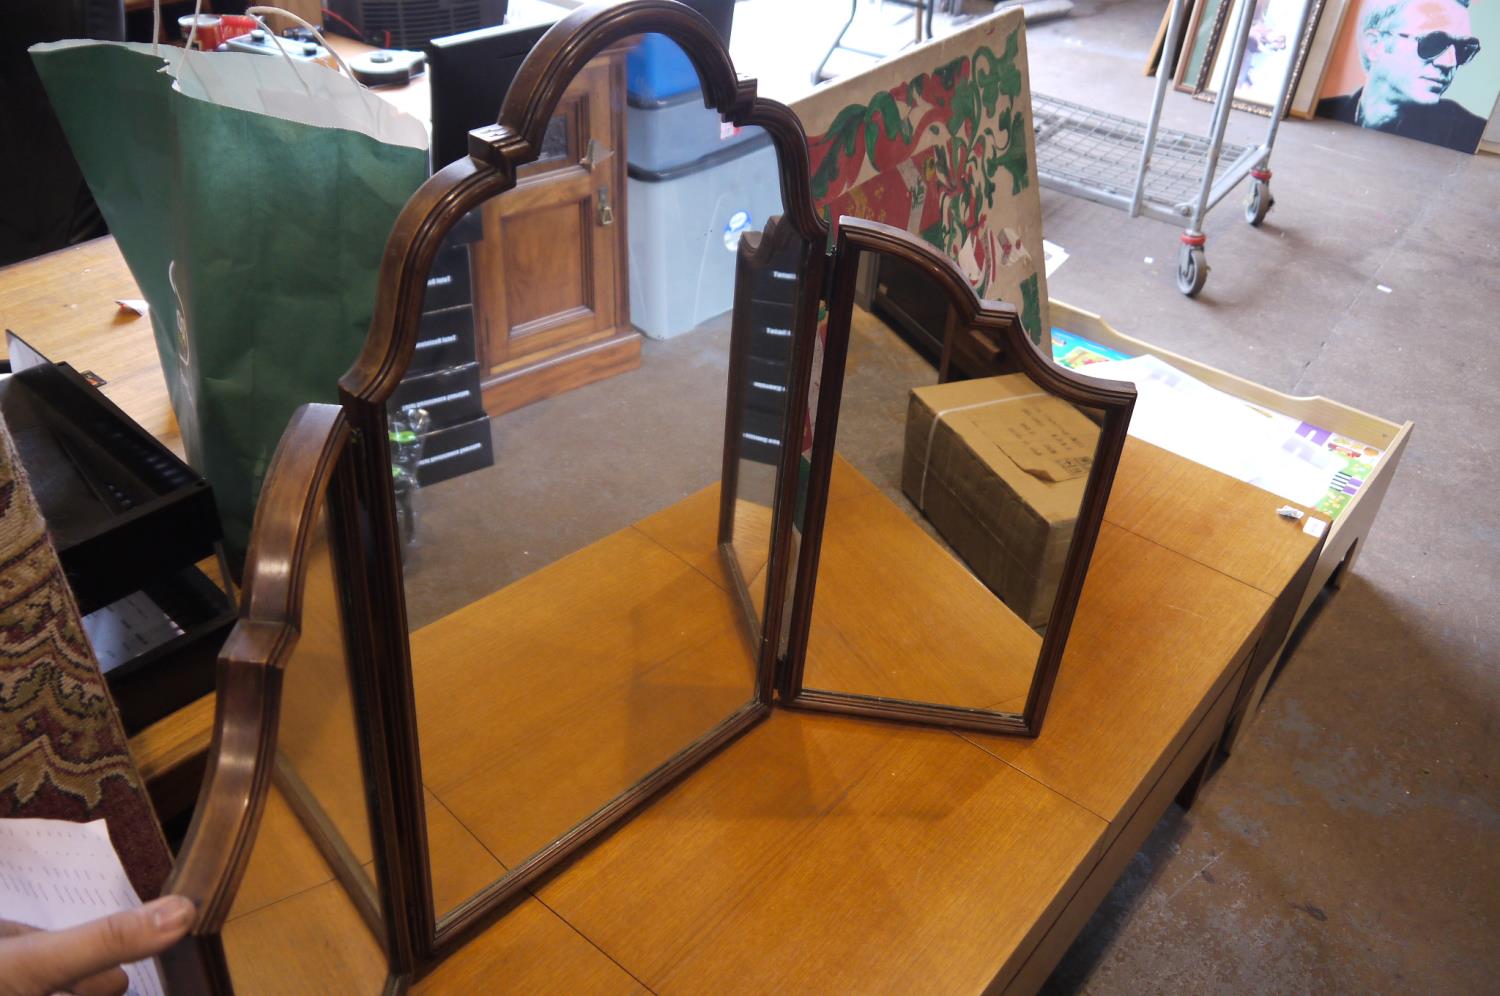 Walnut framed three sectional mirror. Not available for in - house P&P